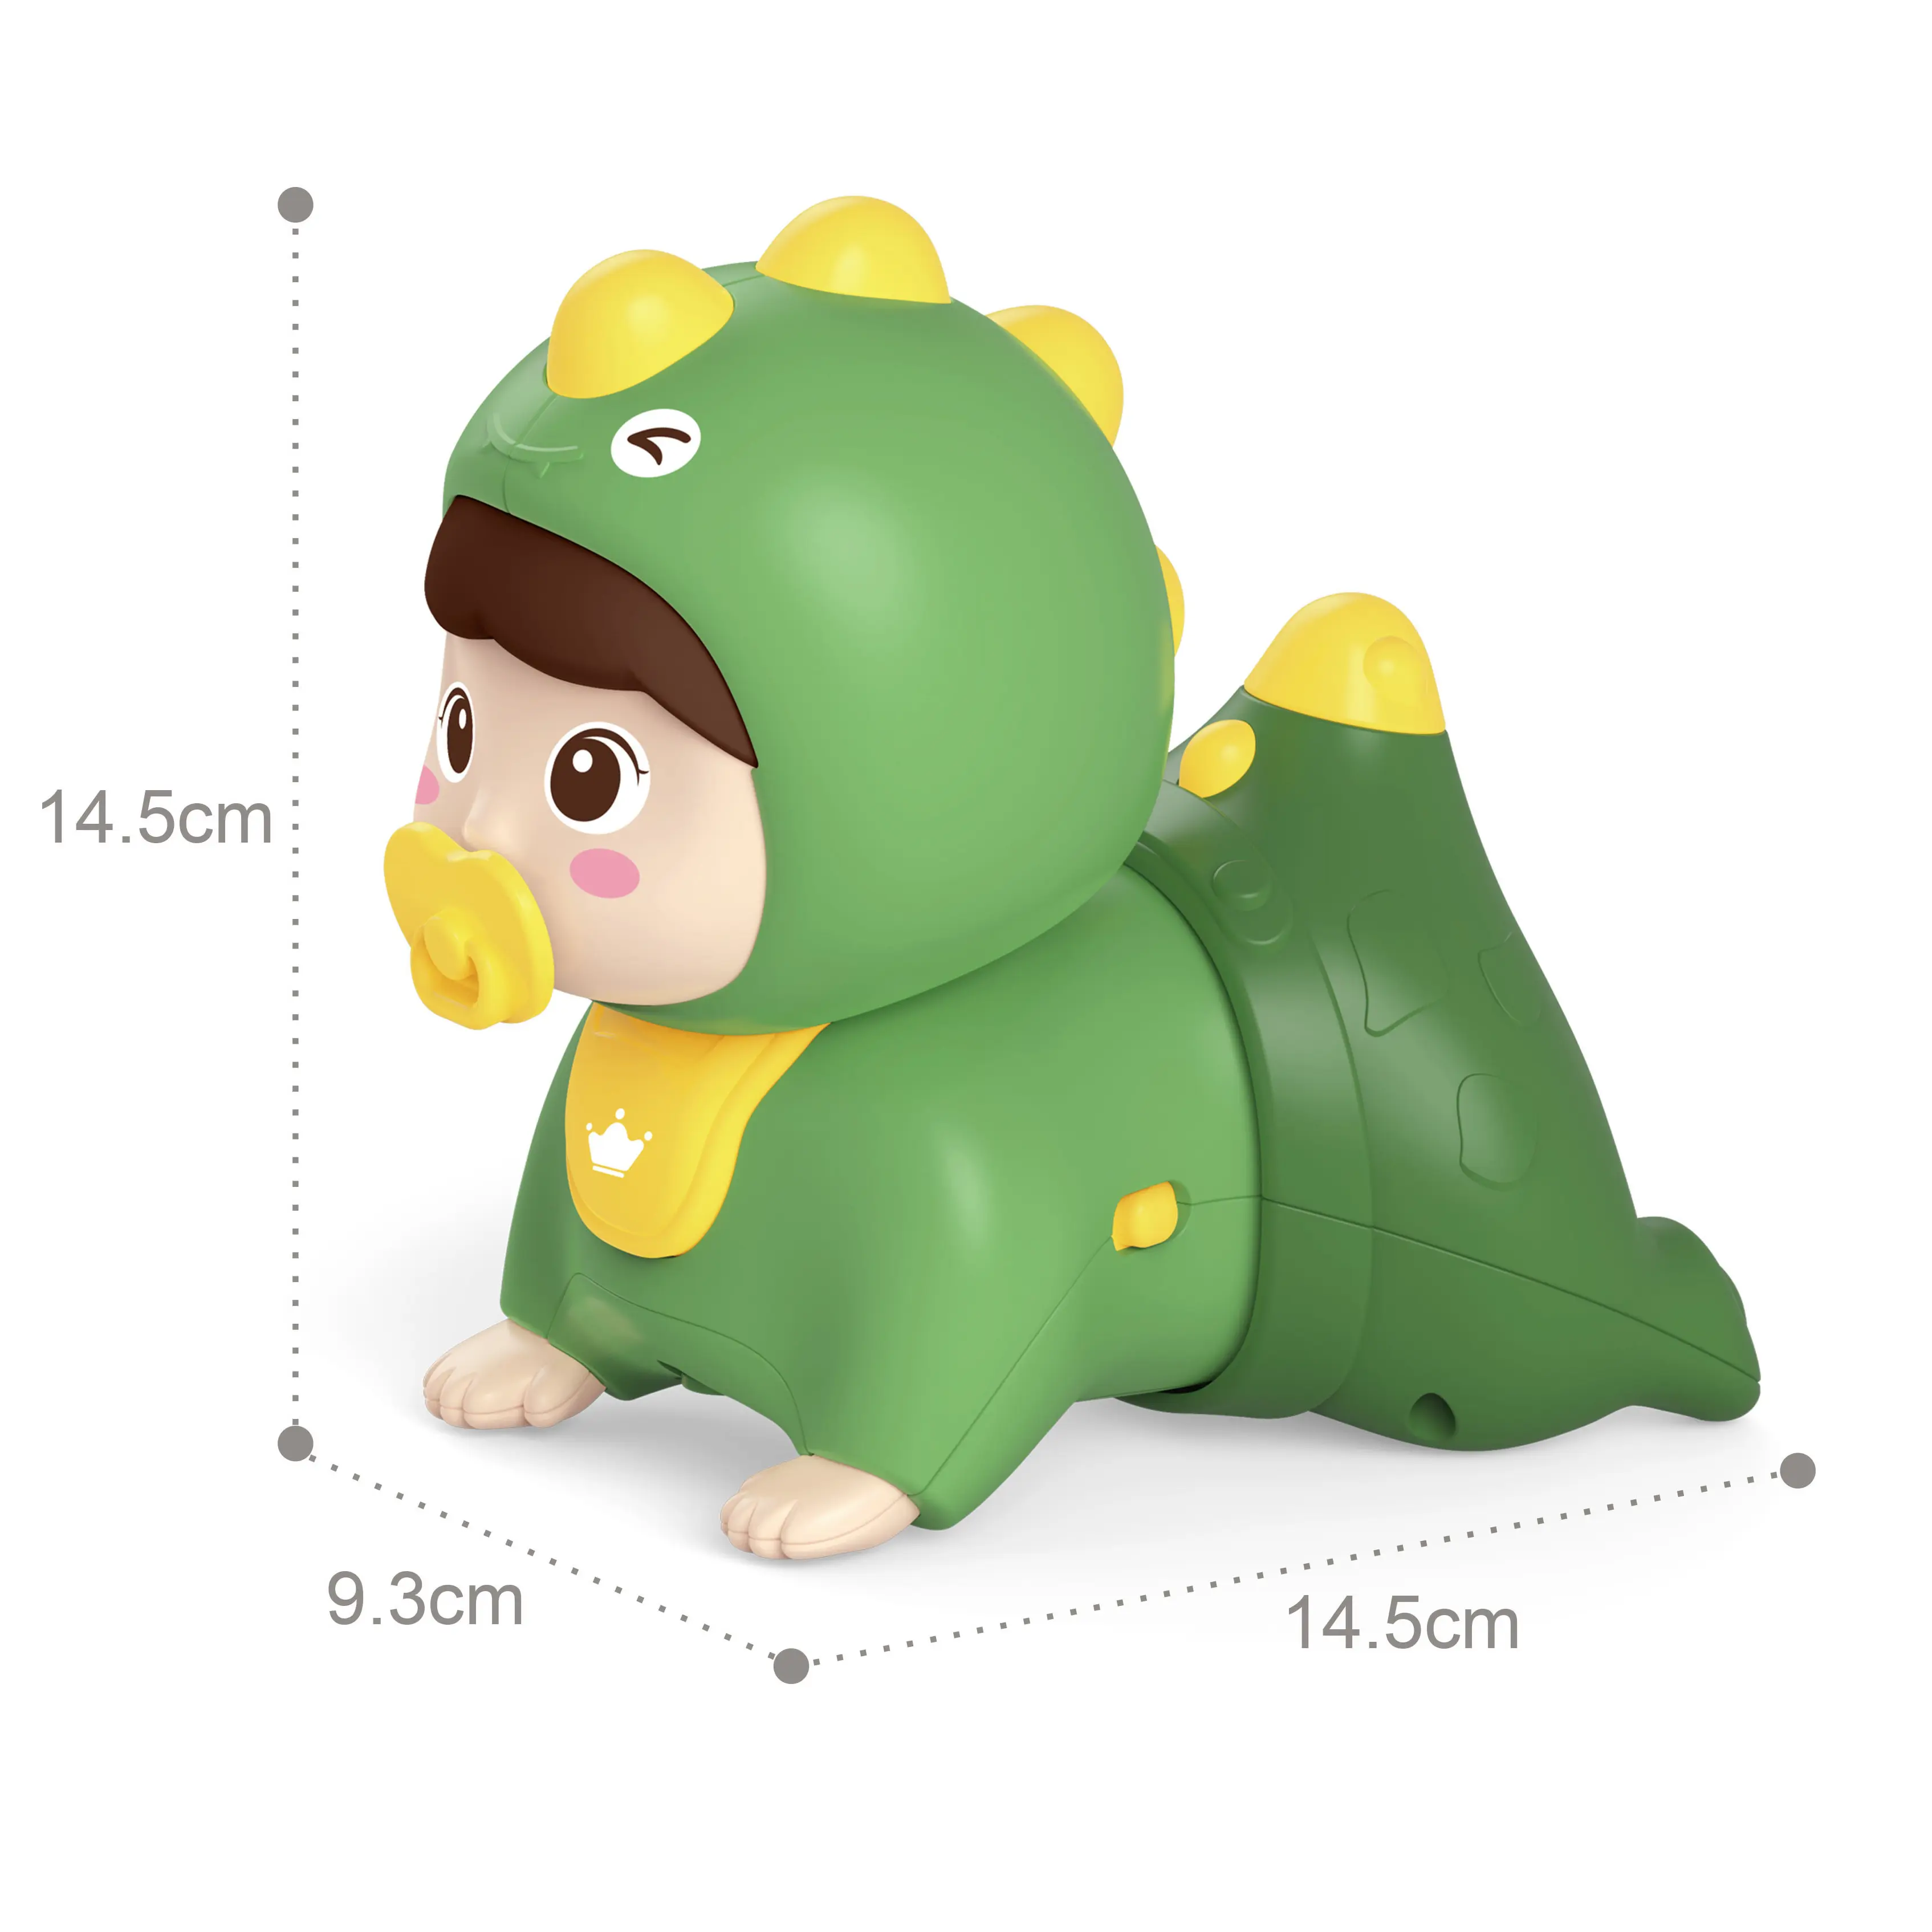 Educational Green Crawling Baby Doll Interactive Learning Development Toys with Music and LED Light Up for Kids Toddler